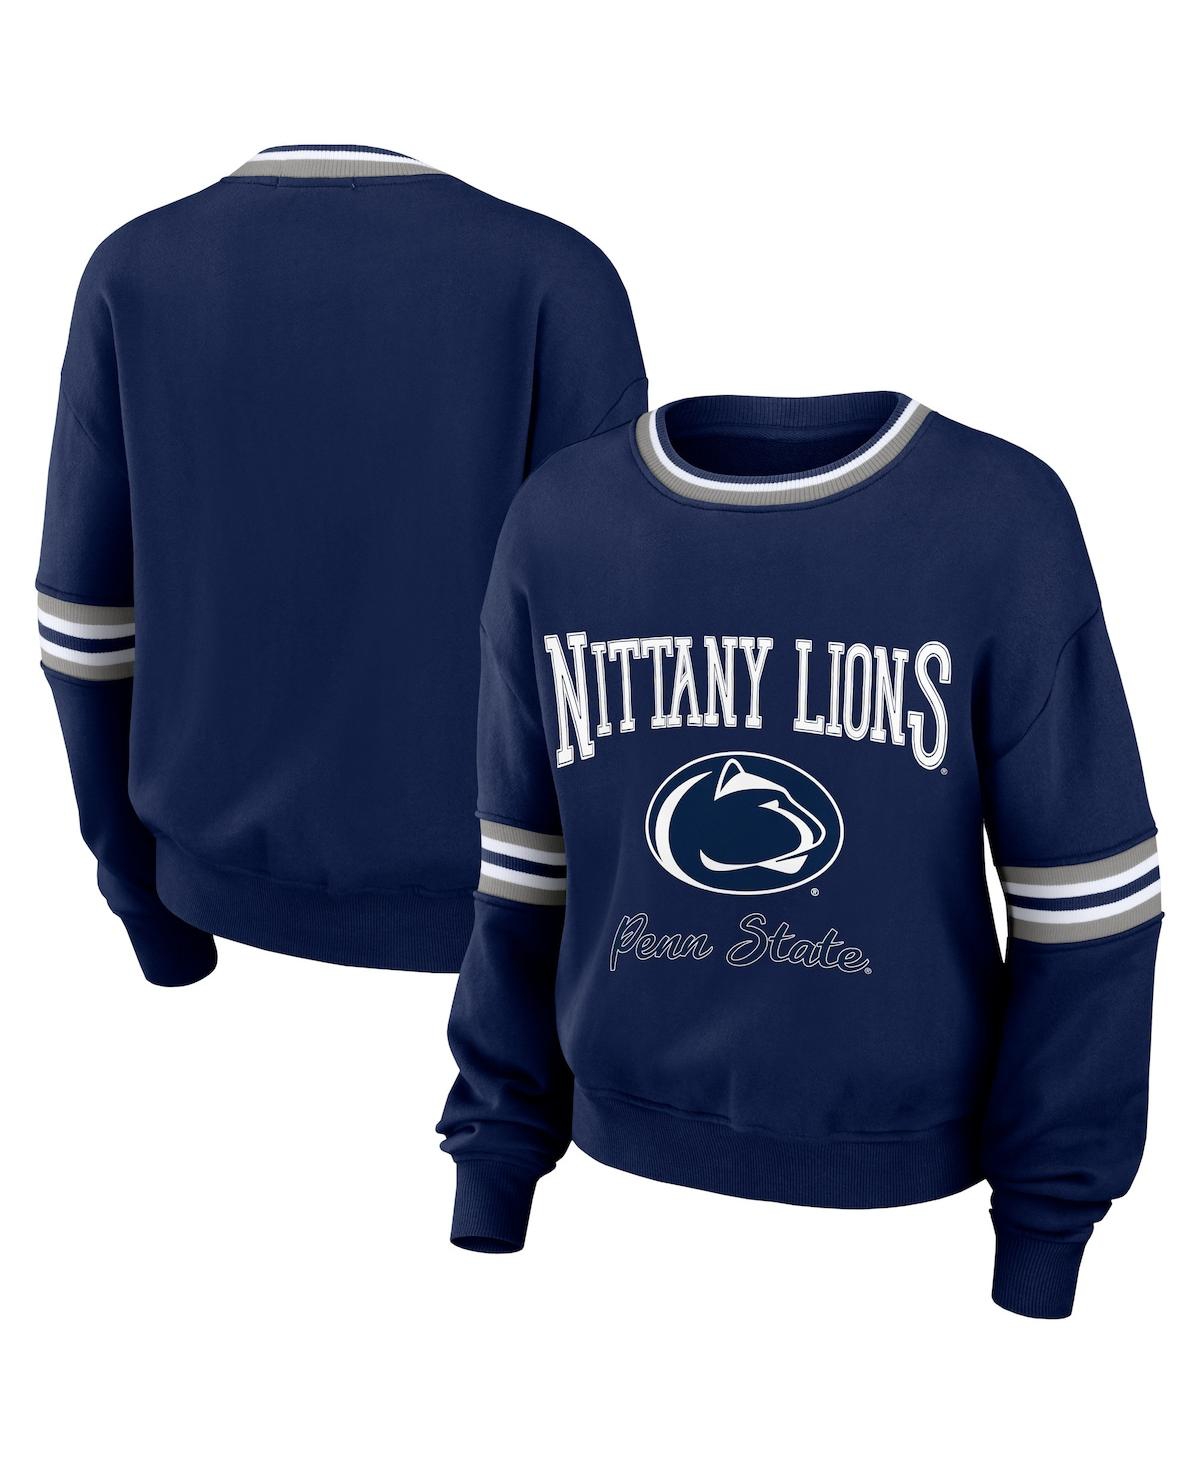 Women's Wear by Erin Andrews Navy Distressed Penn State Nittany Lions Vintage-Like Pullover Sweatshirt - Navy